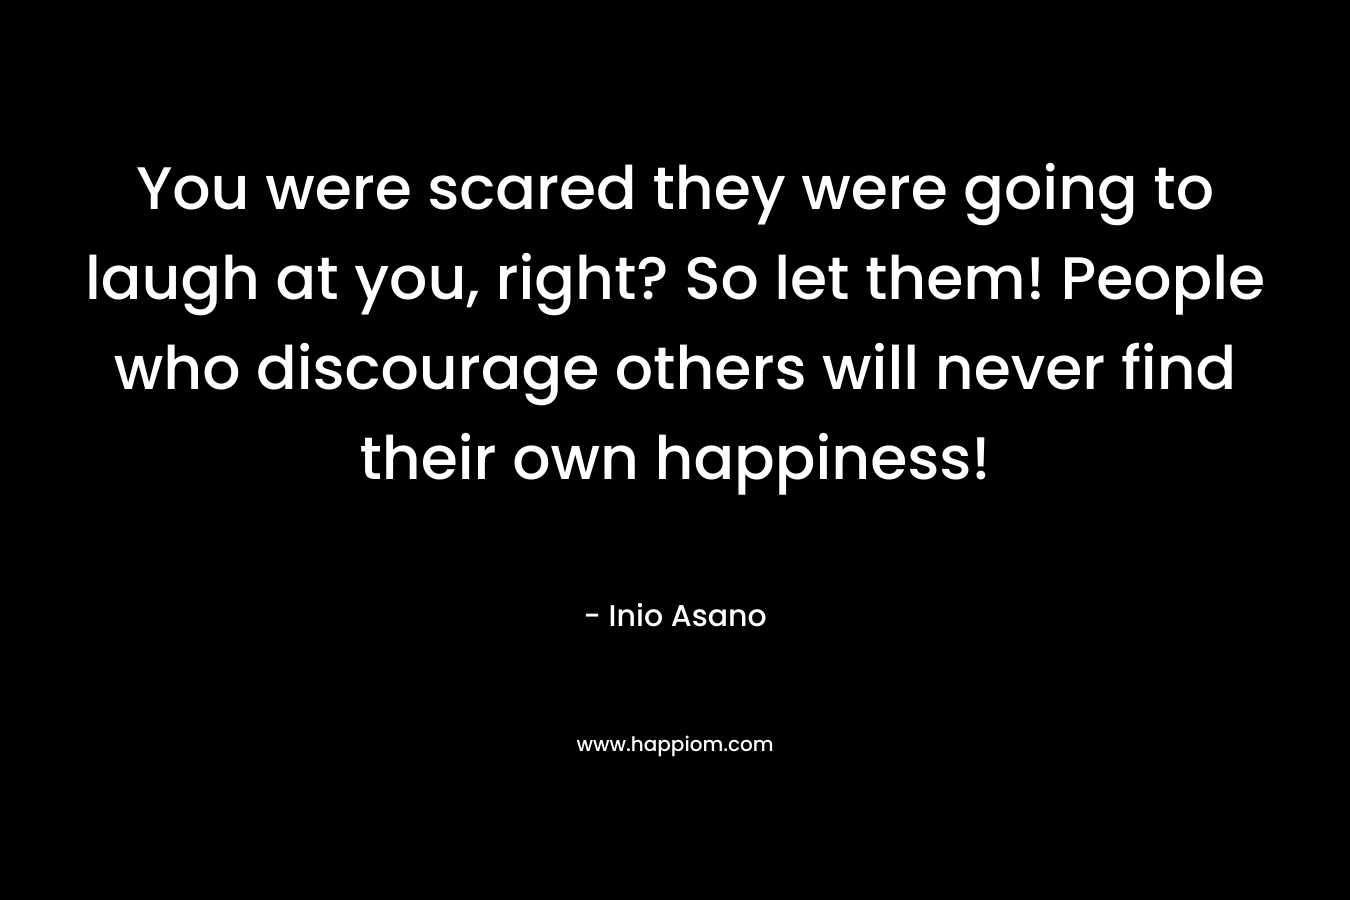 You were scared they were going to laugh at you, right? So let them! People who discourage others will never find their own happiness!